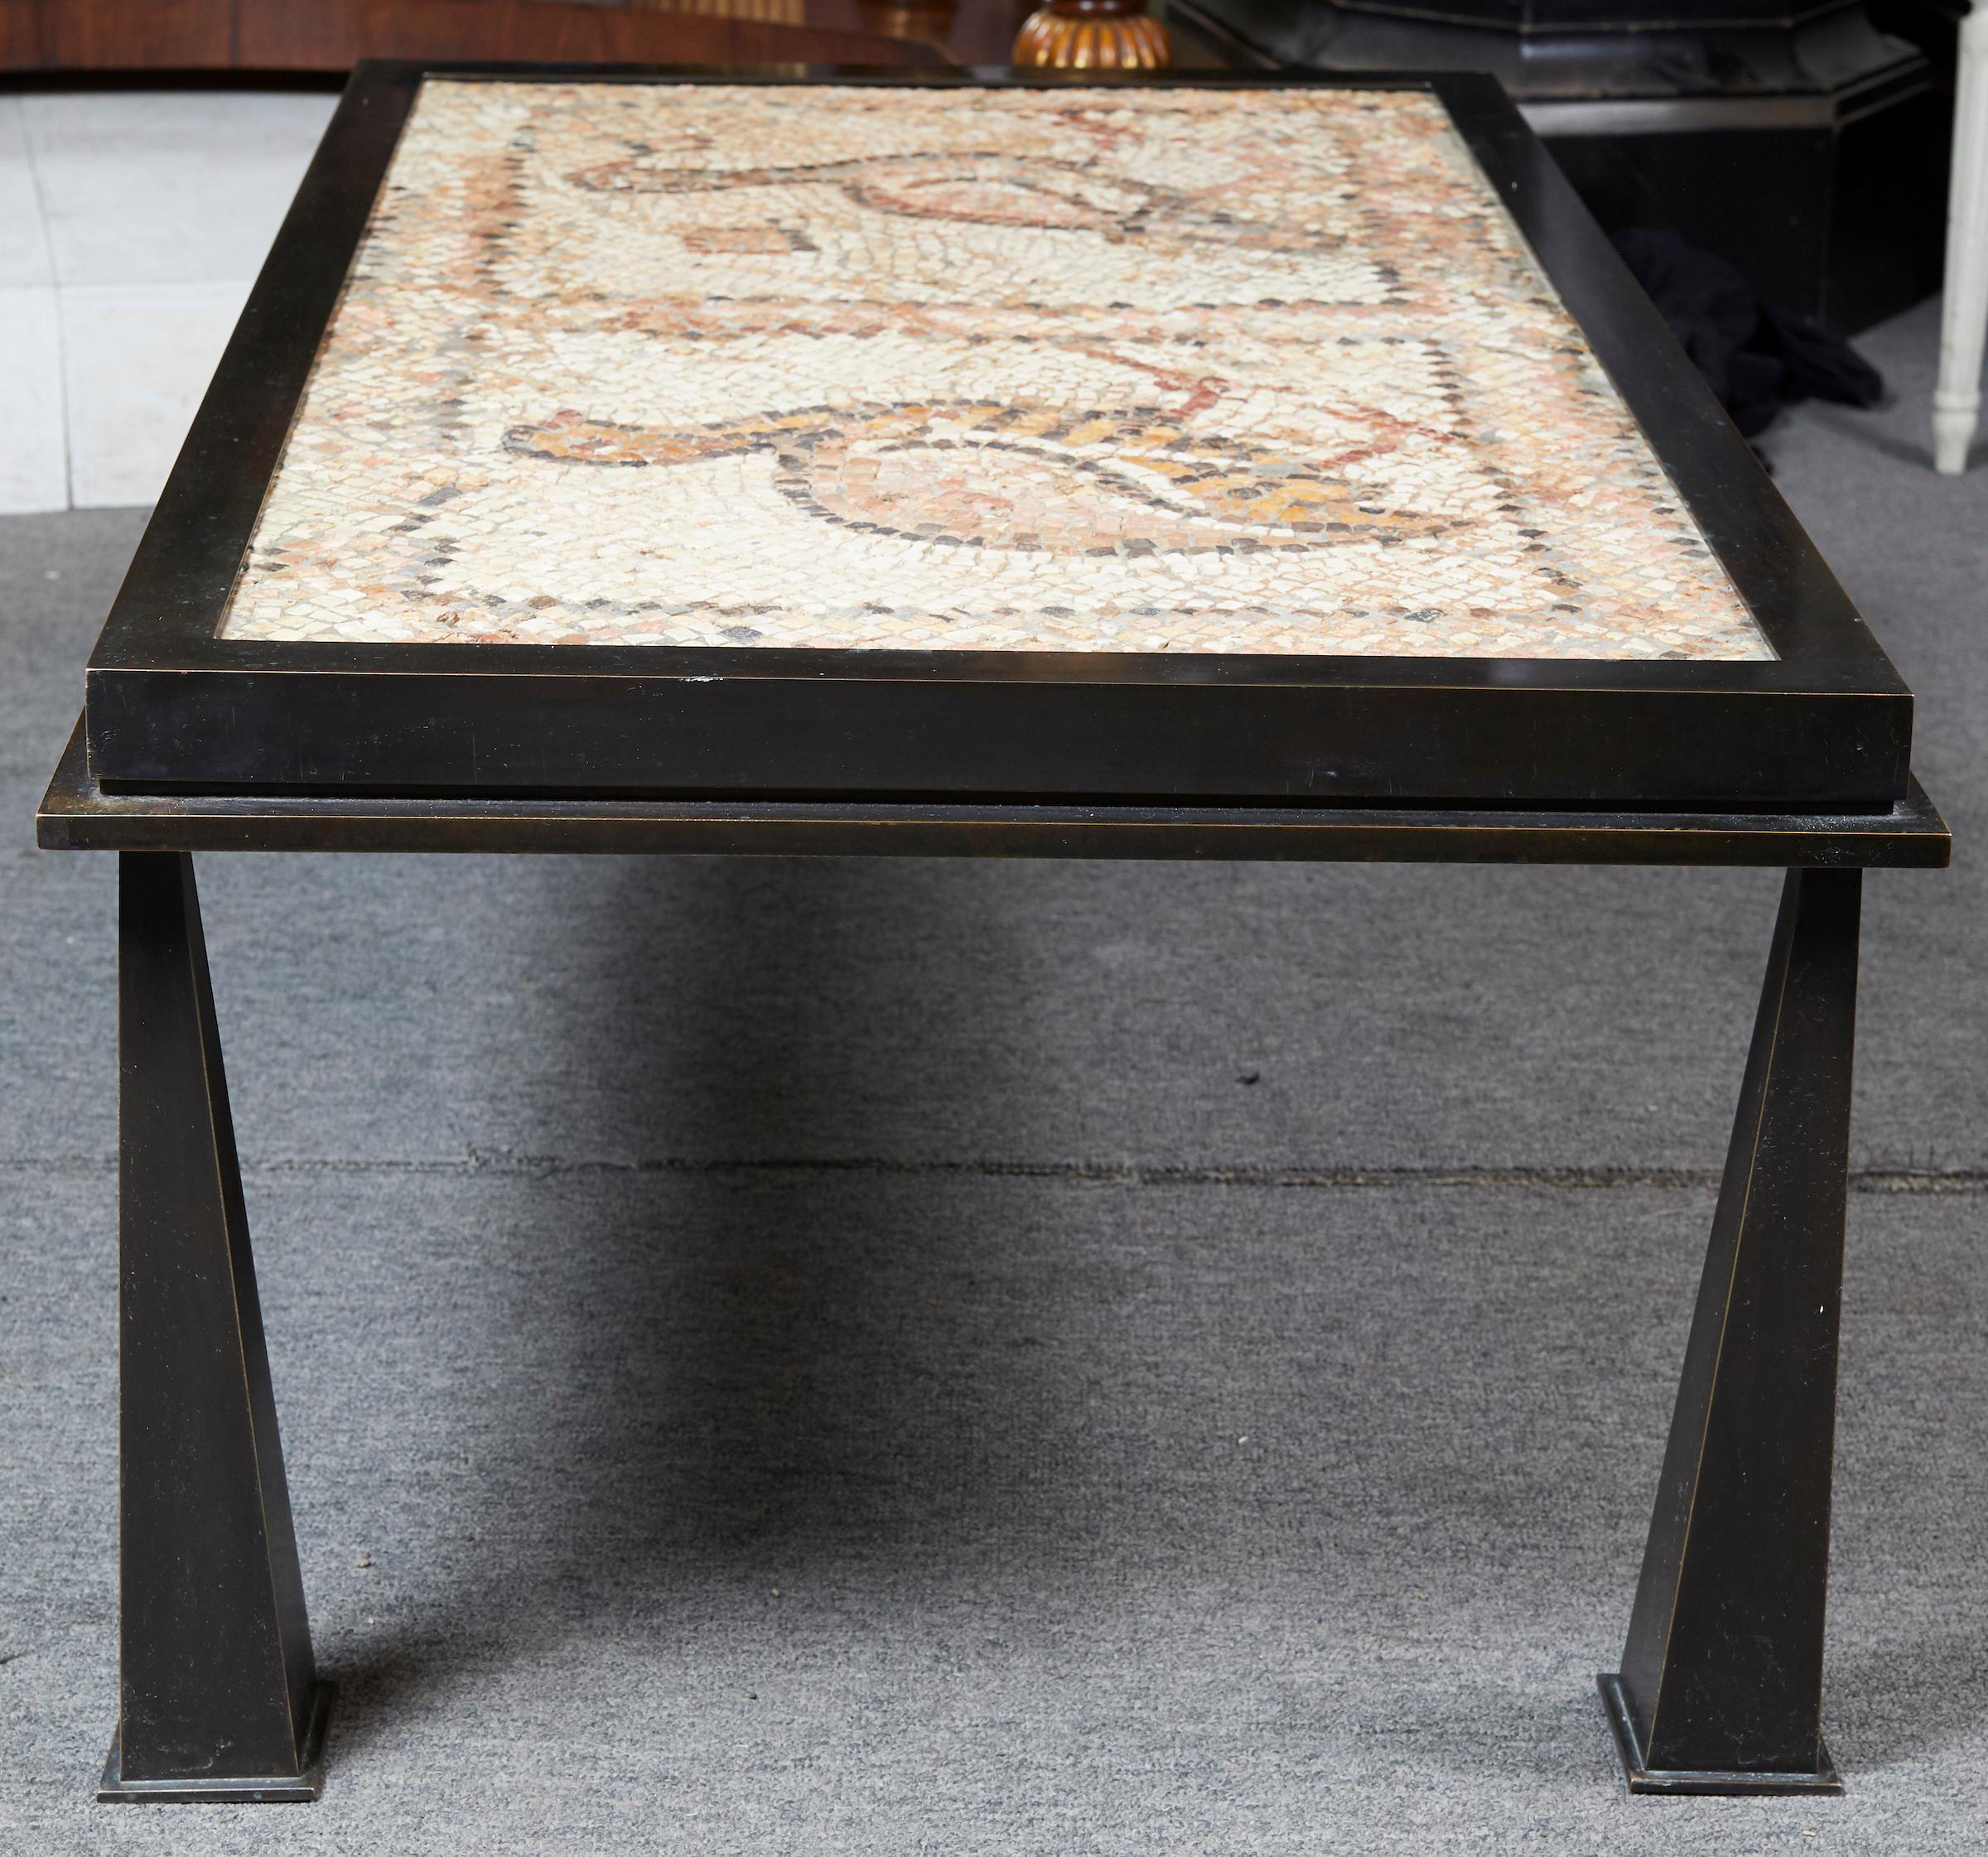 20th Century Patinated Bronze Coffee Table Fitted with a Stone Mosaic Top For Sale